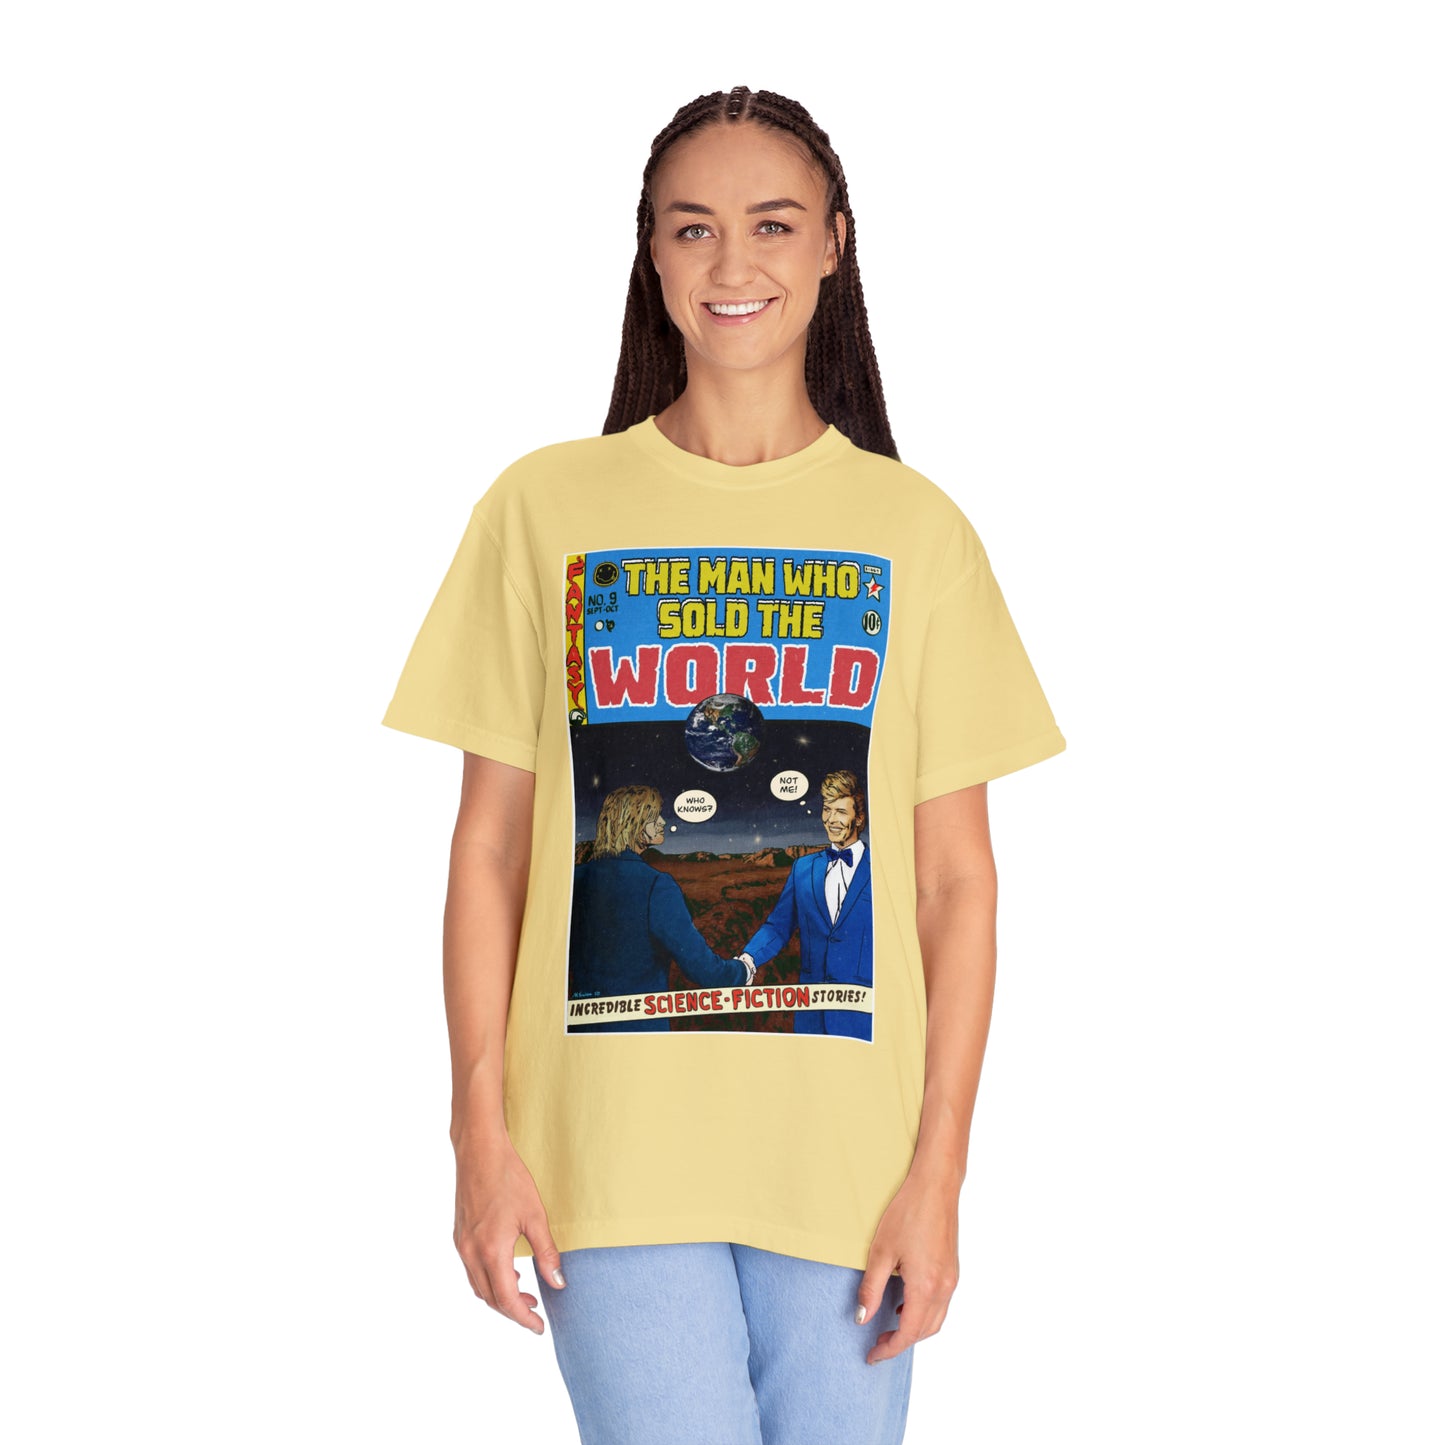 Nirvana - Man Who Sold the World - Unisex Comfort Colors T-shirt